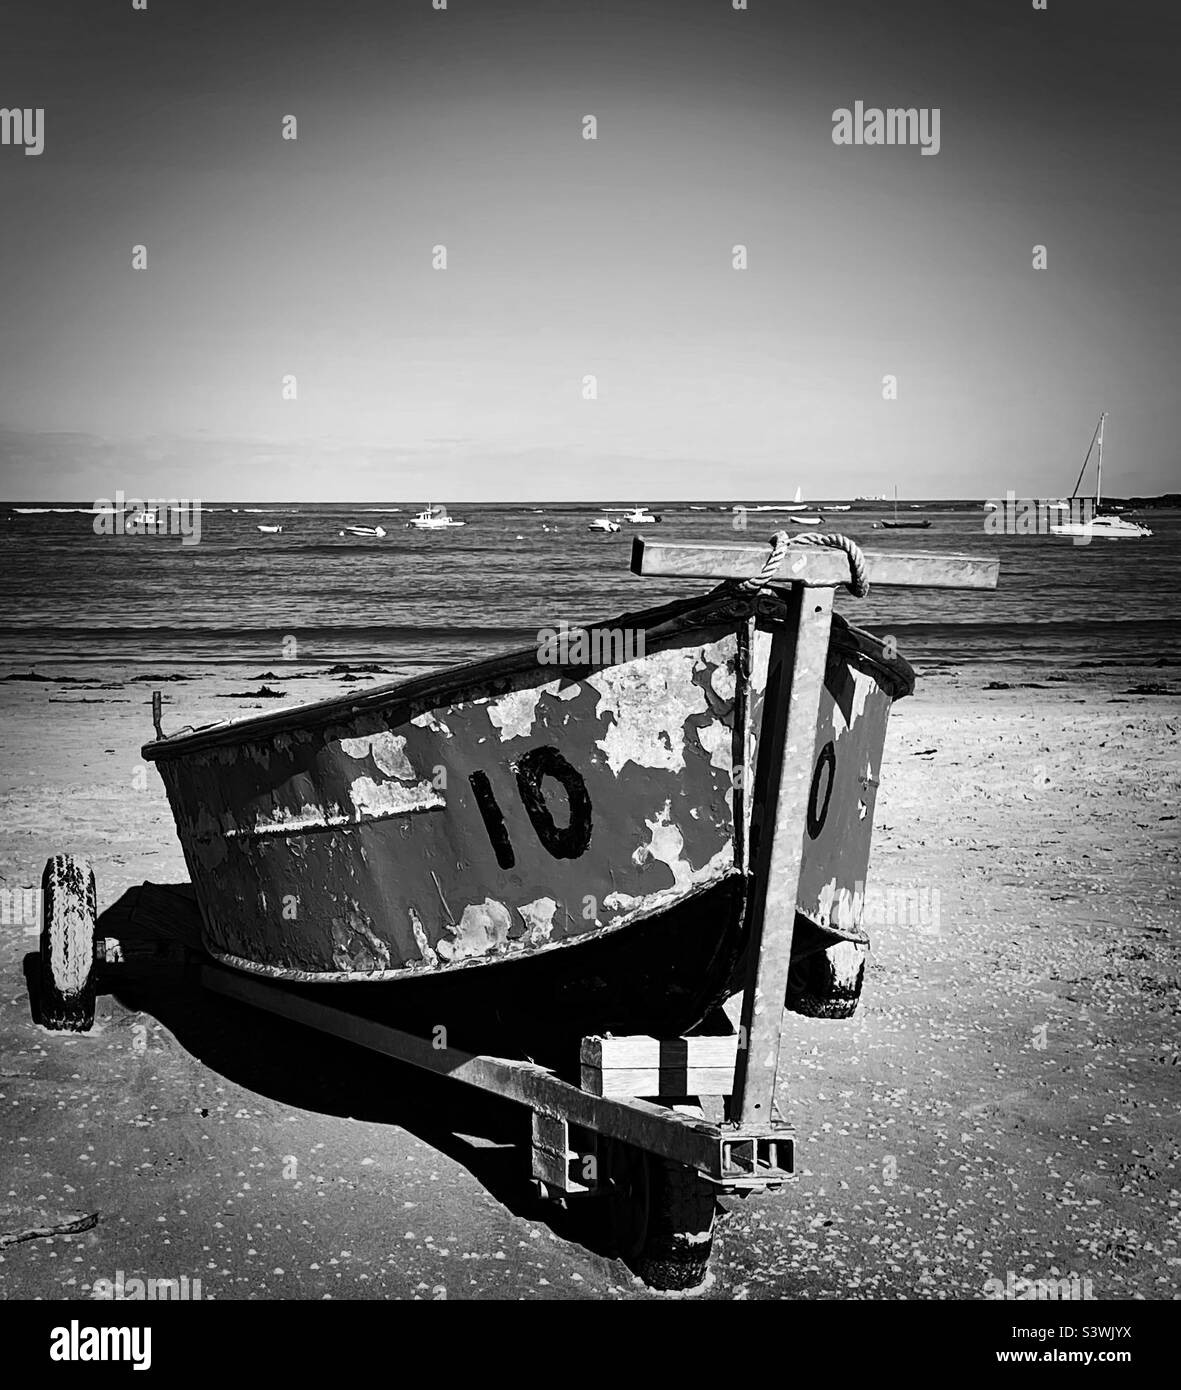 ‘Number 10’ an old boat sits on the shore, envious of the newer, younger models on the water (Black & White) Stock Photo